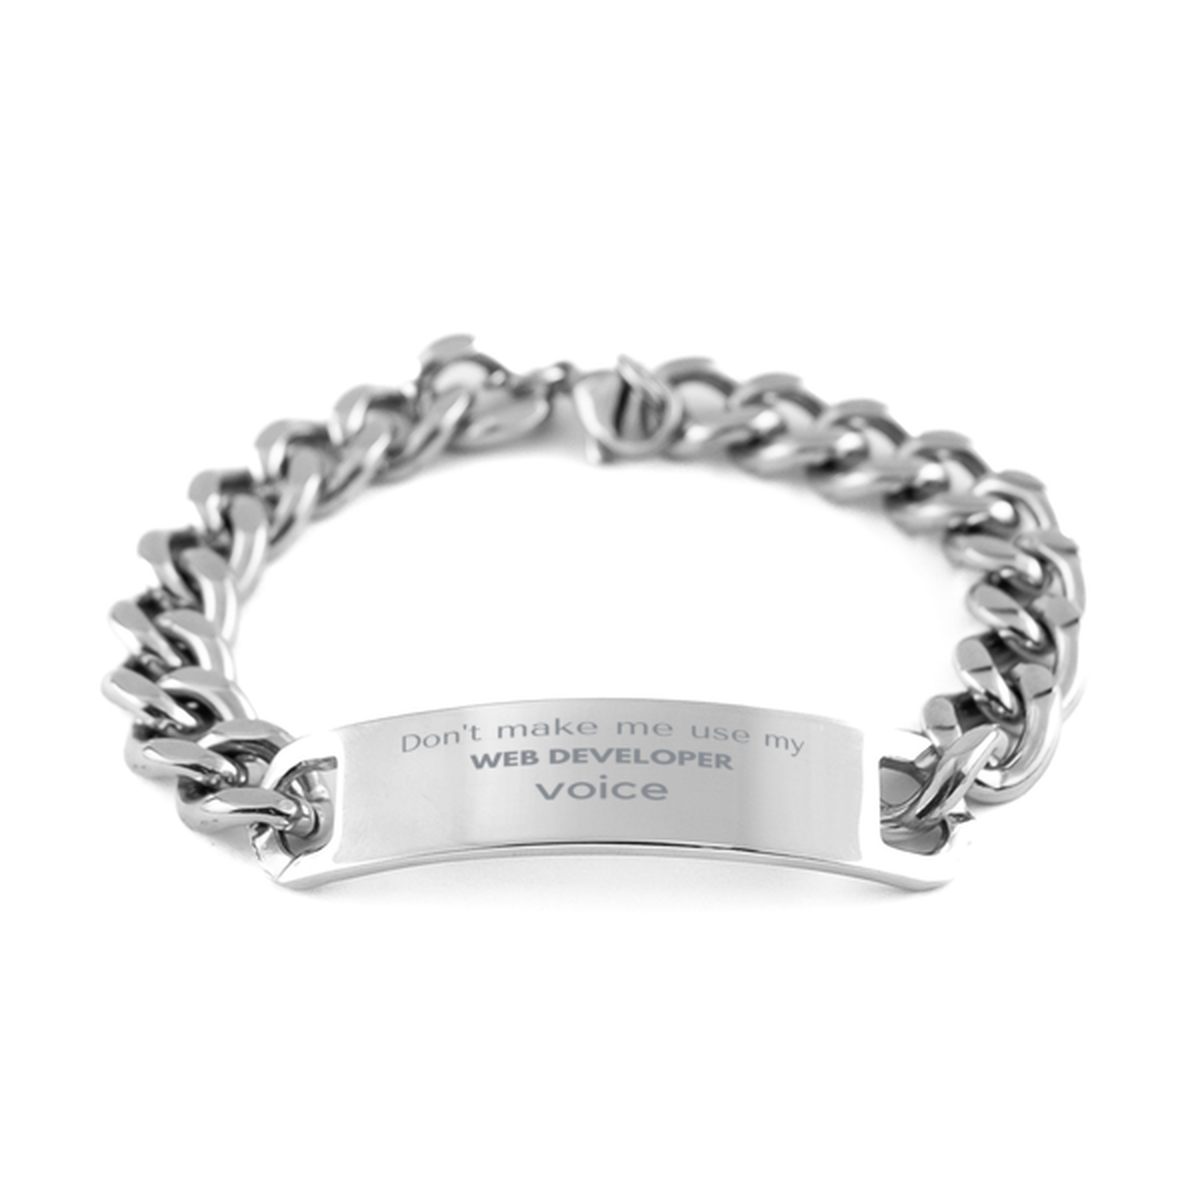 Don't make me use my Web Developer voice, Sarcasm Web Developer Gifts, Christmas Web Developer Cuban Chain Stainless Steel Bracelet Birthday Unique Gifts For Web Developer Coworkers, Men, Women, Colleague, Friends